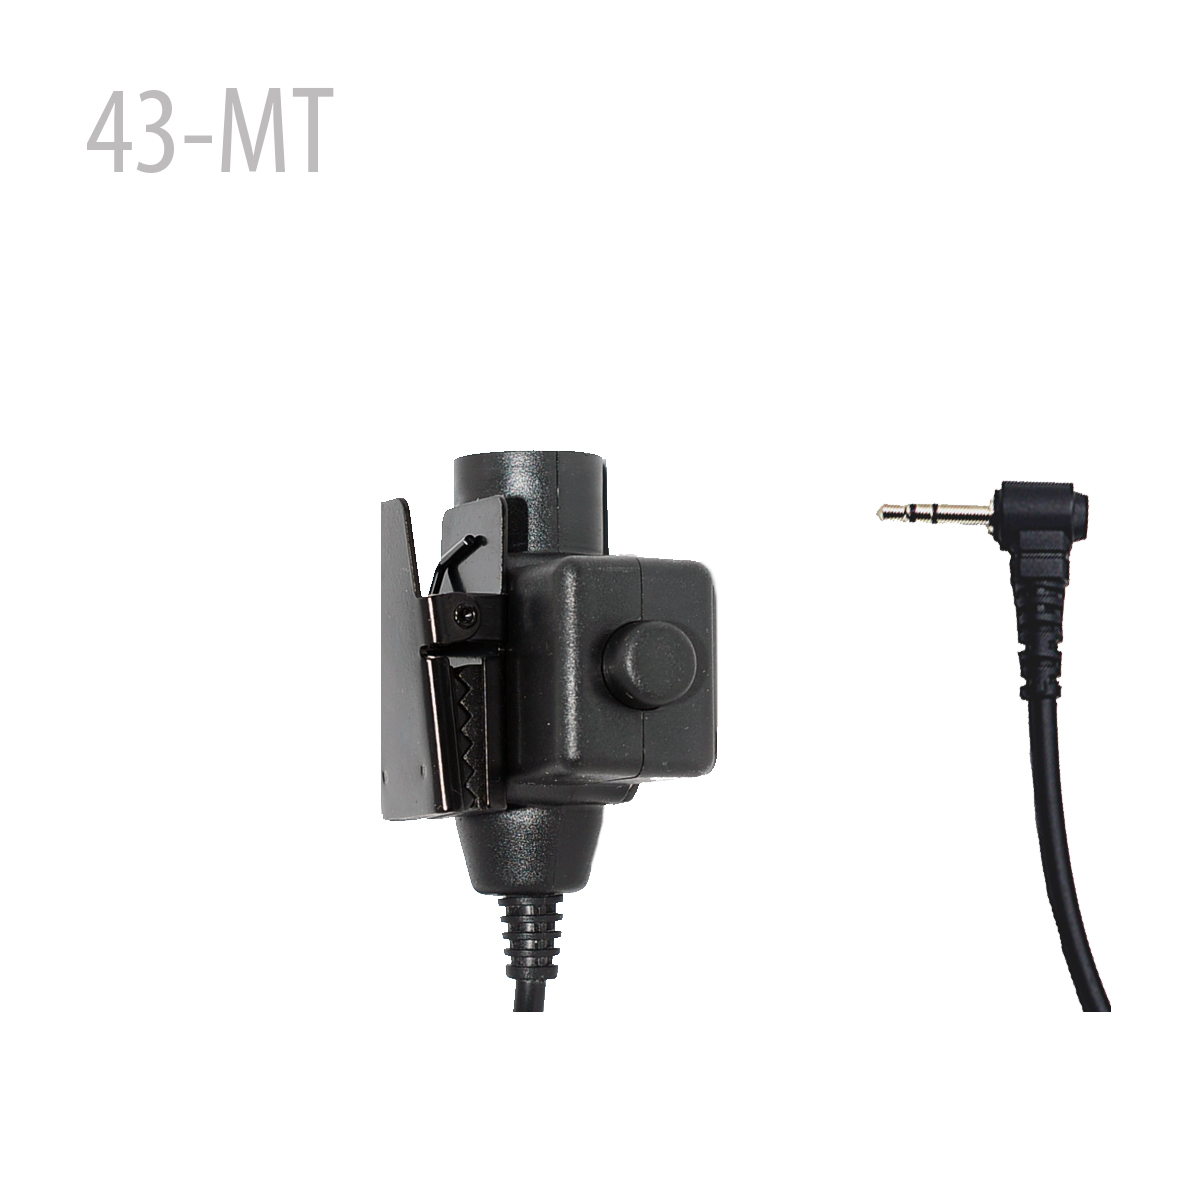 PTT Switch Plug  Motorola Talkabout (1 pin) for 4-187 Headset